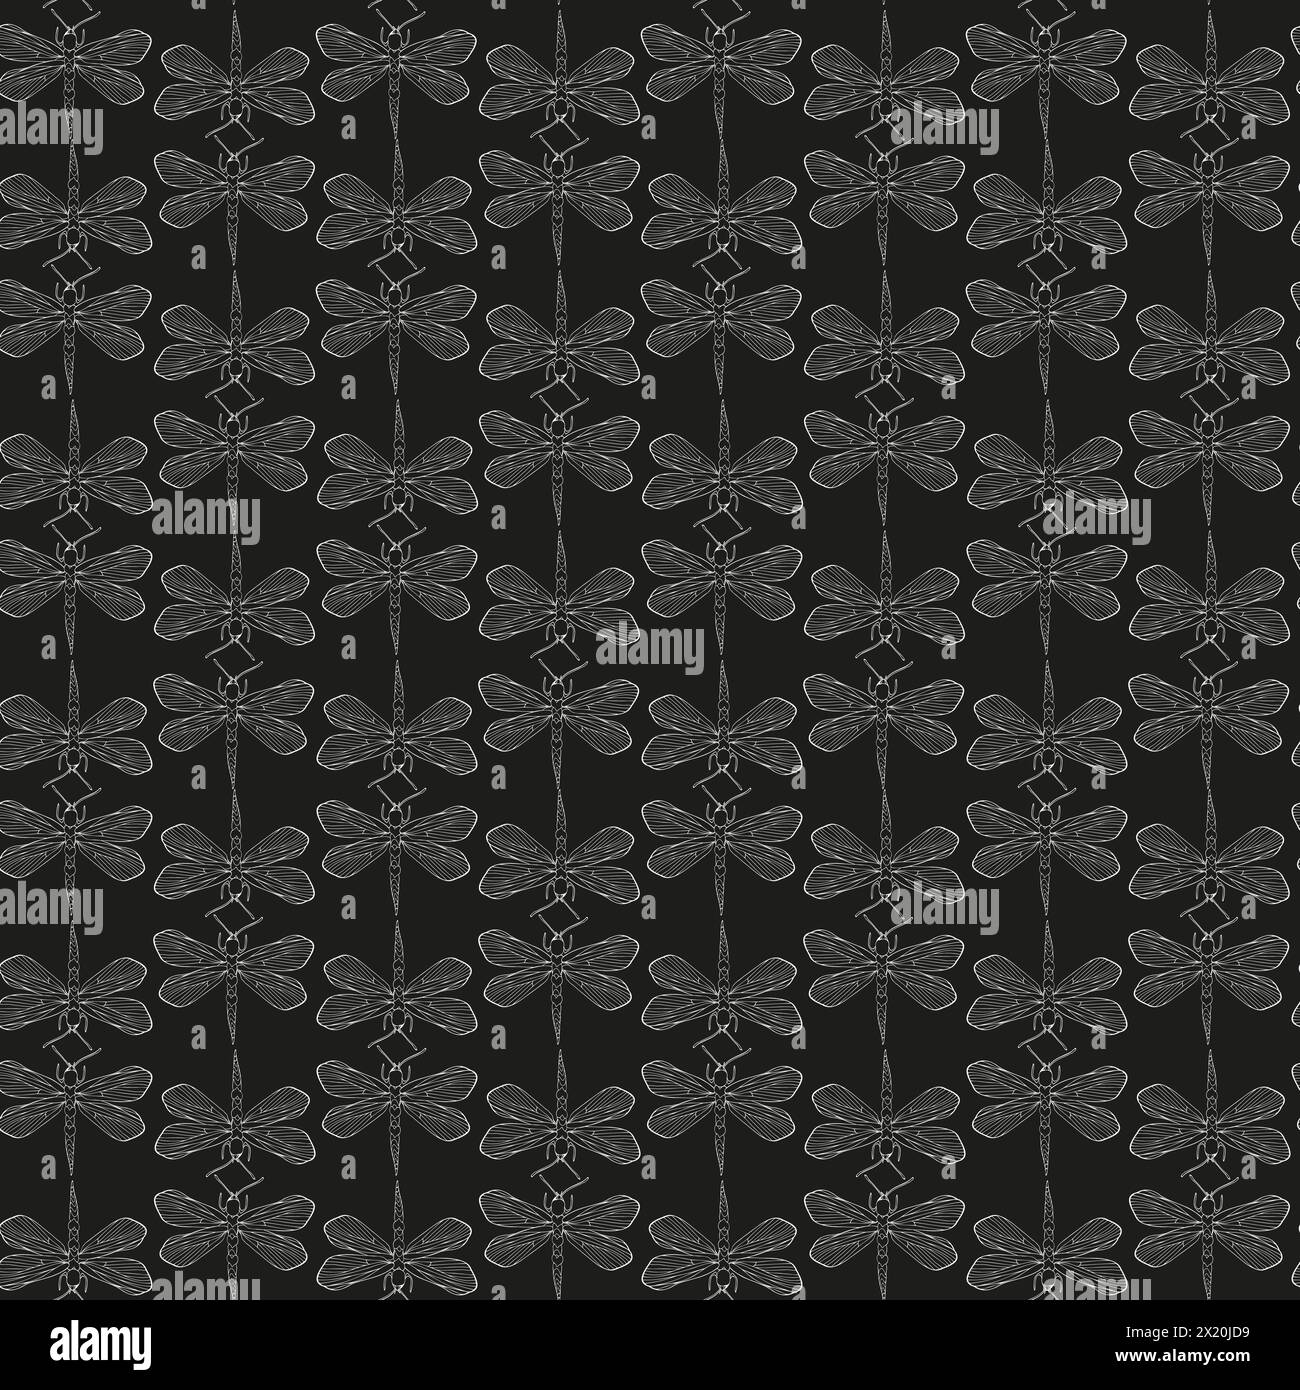 Butterflies black and white ink line vector symmetry seamless pattern background for textile, fabric, wallpaper, scrapbook. Insects with wings drawing Stock Vector